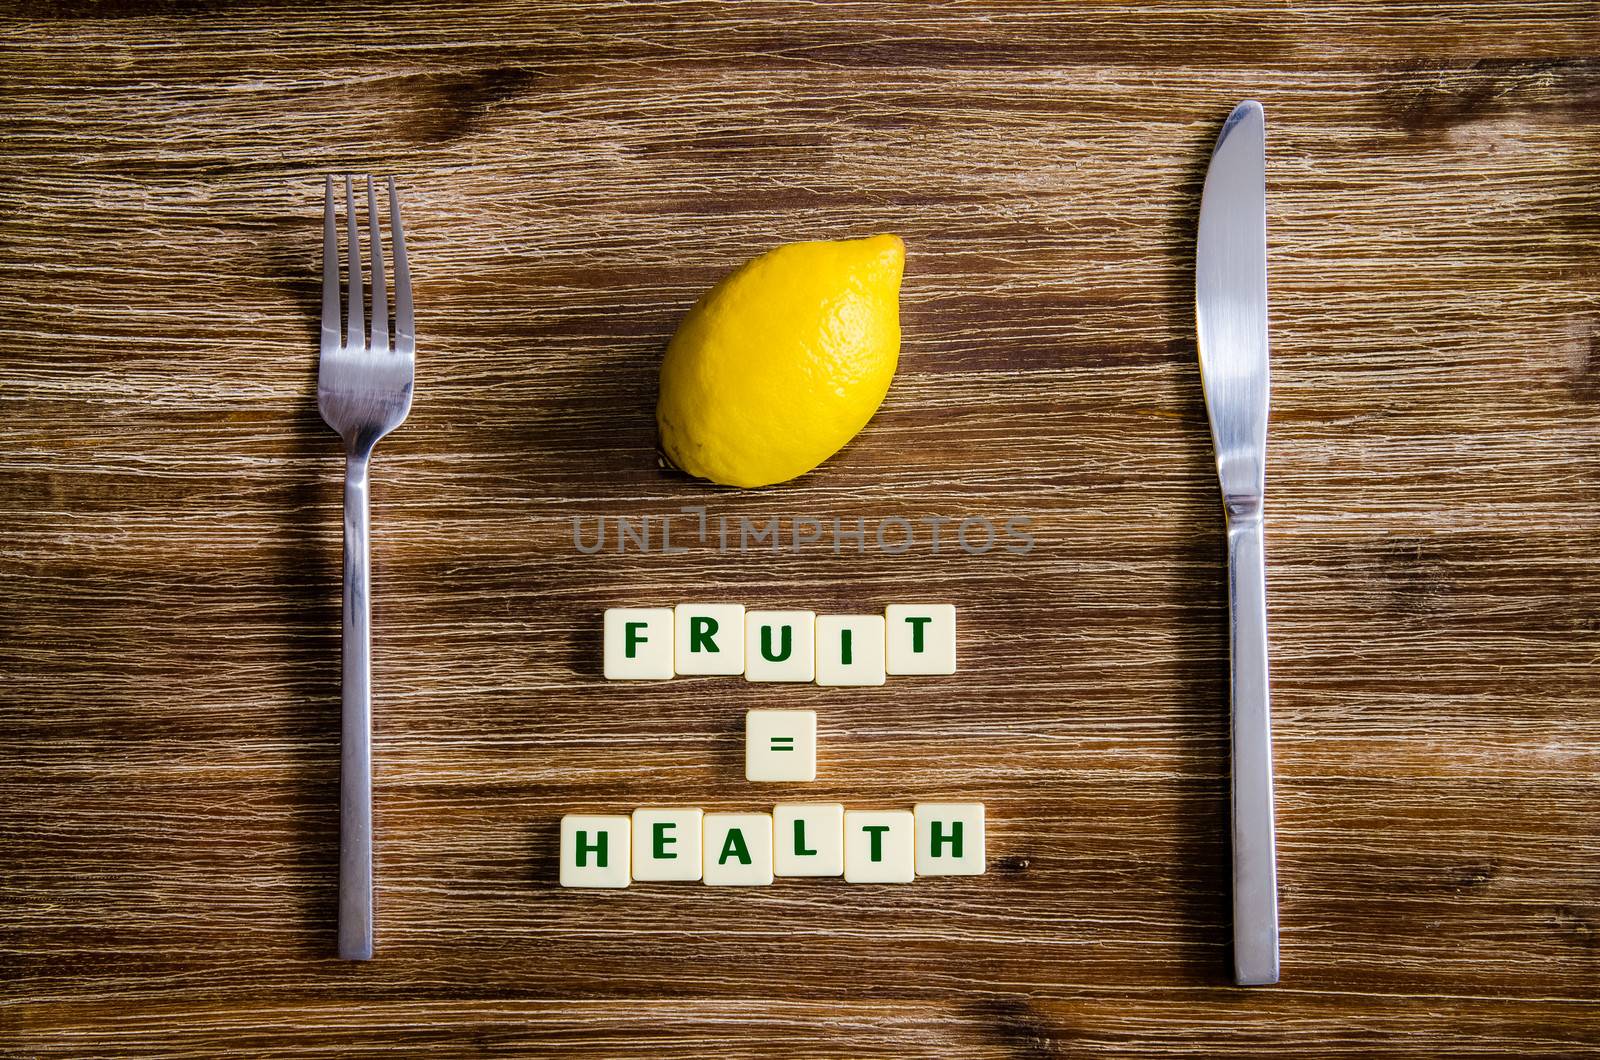 Silverware and lemon set on wooden table with sign saying Fruit equals health